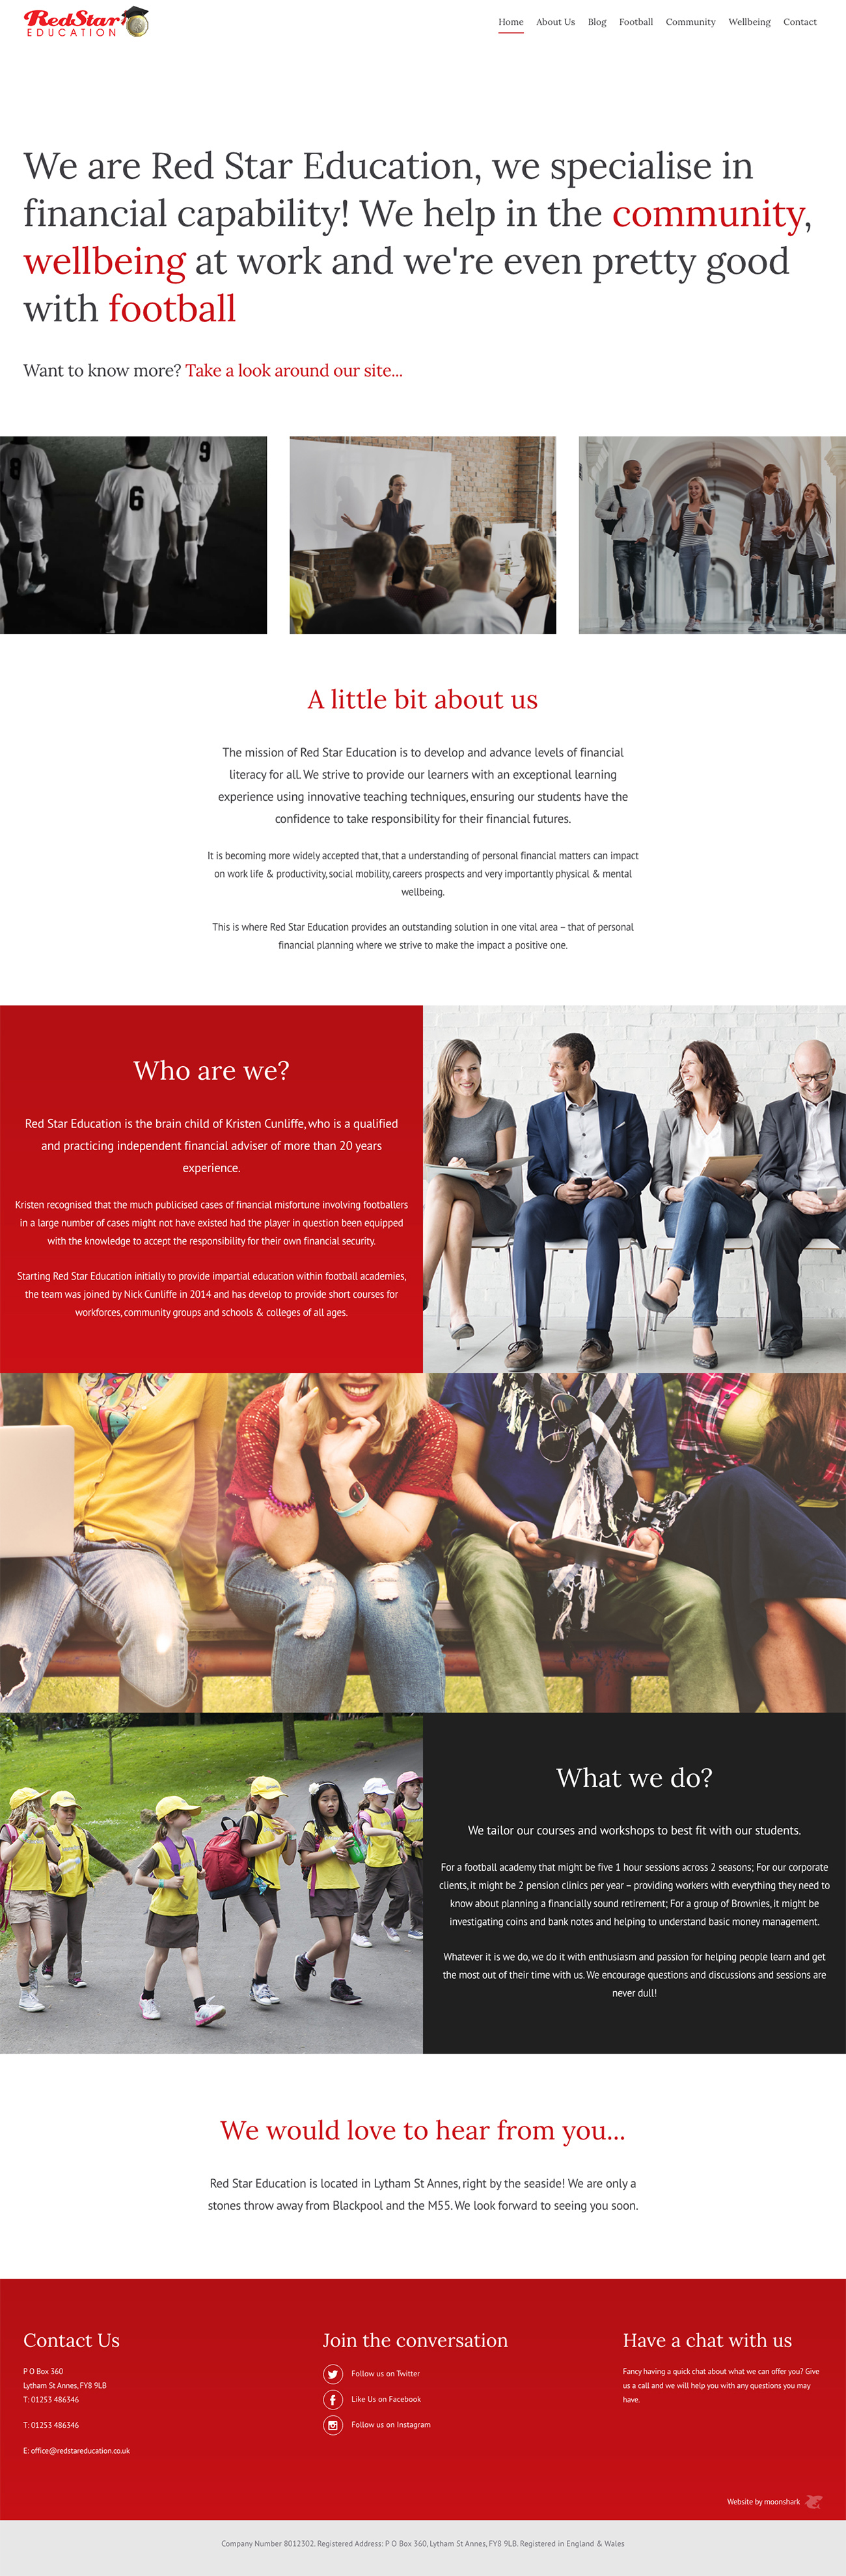 The homepage of the Red Star Education Website